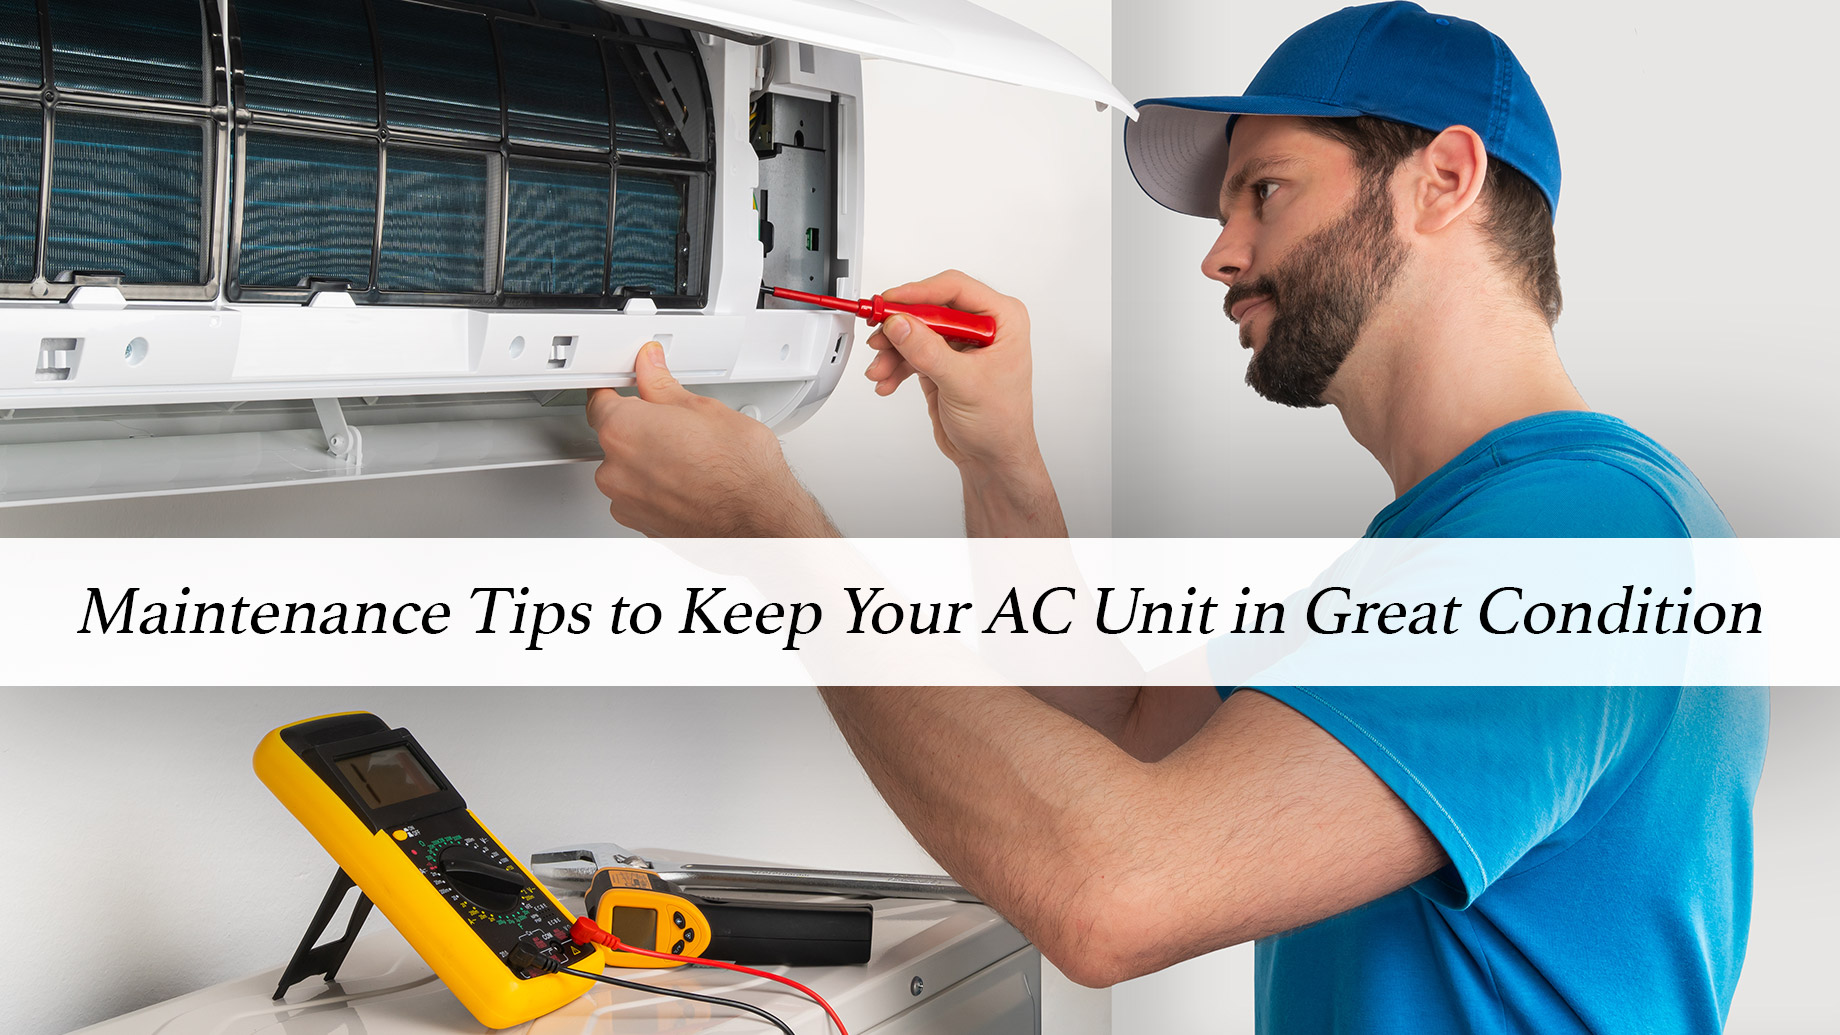 Maintenance Tips to Keep Your AC Unit in Great Condition